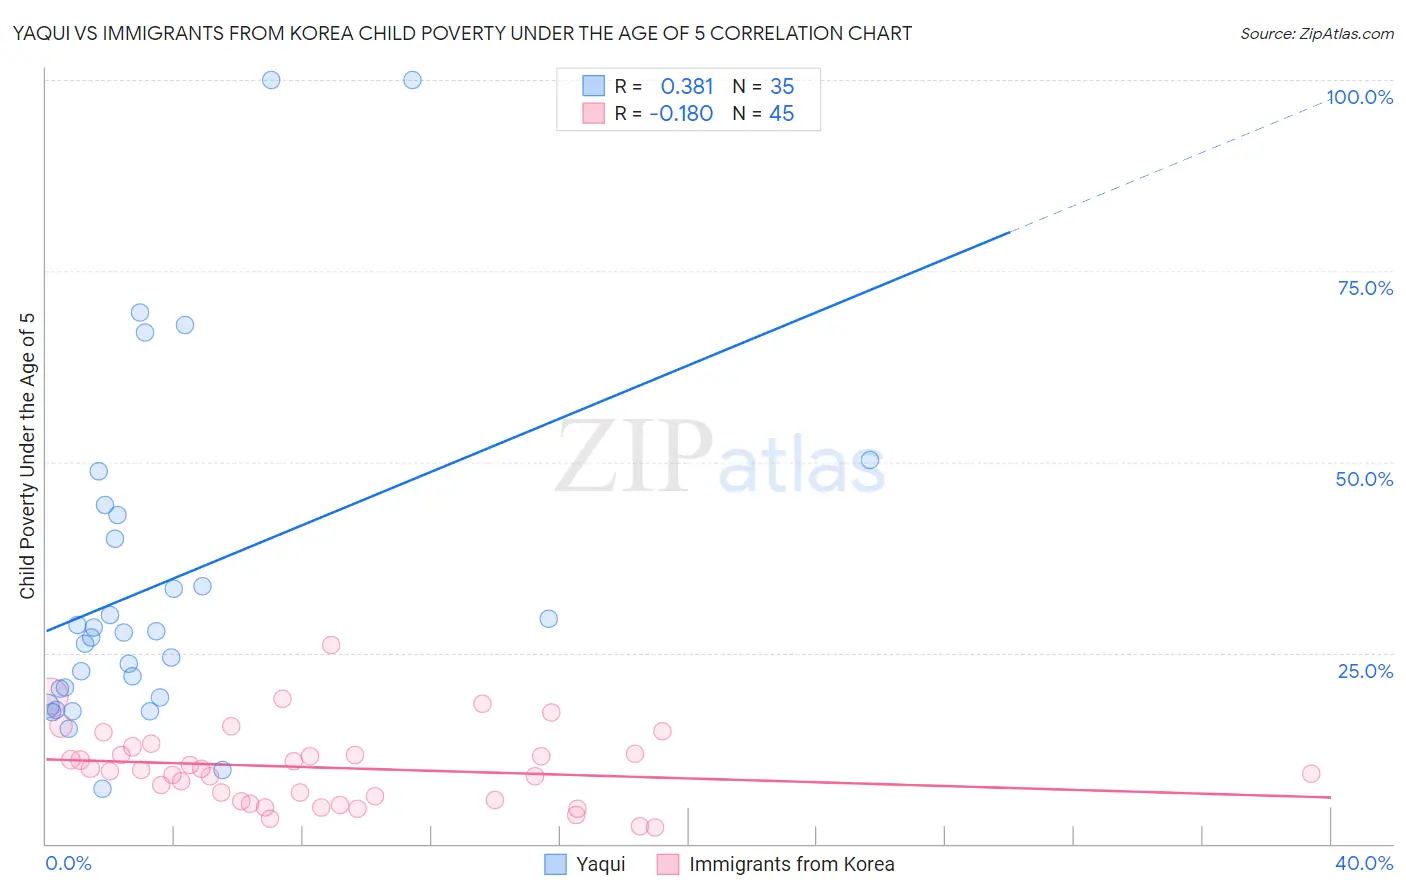 Yaqui vs Immigrants from Korea Child Poverty Under the Age of 5